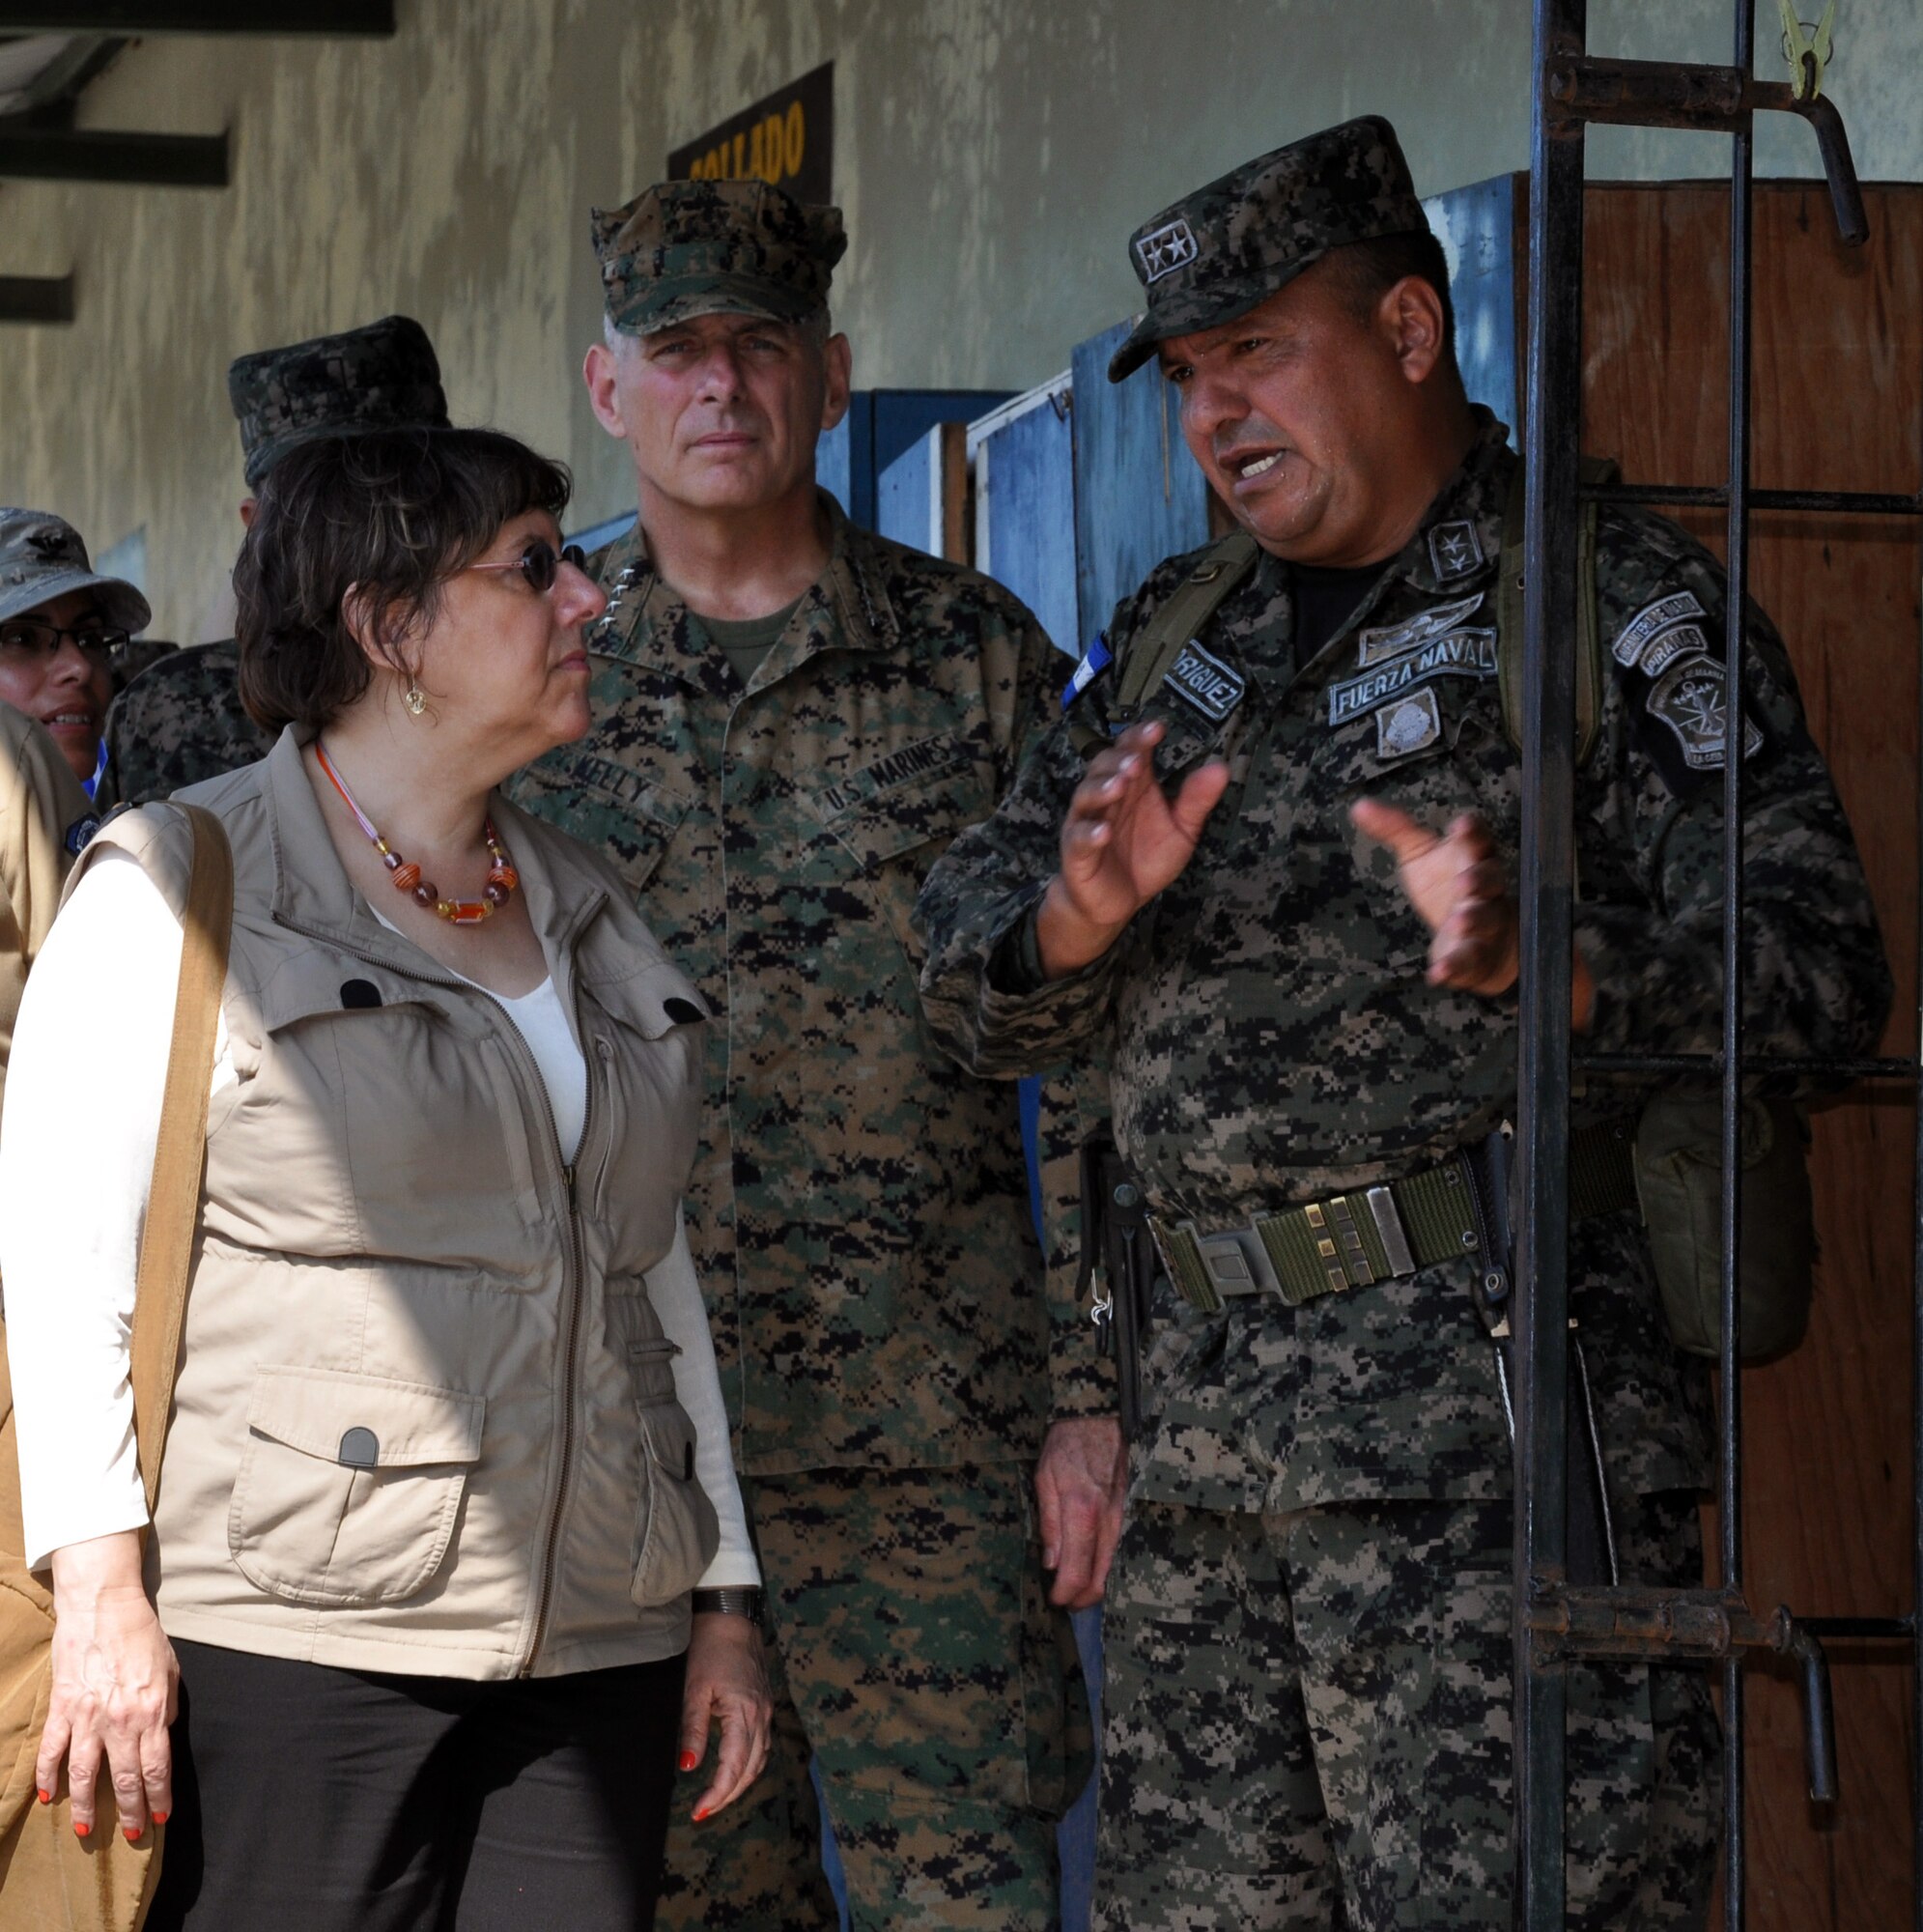 U.S. Marine Corps Gen. John F. Kelly, Commander, U.S. Southern Command, and U.S. Ambassador to Honduras Lisa Kubiske, visit with a Honduran military member while touring Honduran marine base at La Ceiba, Honduras, Feb. 12, 2014.  Kelly and a delegation of U.S. Department of State and U.S. and Honduran military leaders, including Kubiske, Honduran Maj. Gen. Fredy Diaz, Joint Chief of the Honduran Military, and Honduran Rear Admiral Hector Caballero, Honduran Navy Commander, spent the day visiting several Honduran military facilities. Throughout the day, the delegation received briefings and had the opportunity to discuss issues with Honduran military leadership. Transportation for the day was provided by UH-60 Blackhawk helicopters from Joint Task Force-Bravo's 1-228th Aviation Regiment. (U.S. Air Force photos by Capt. Zach Anderson)